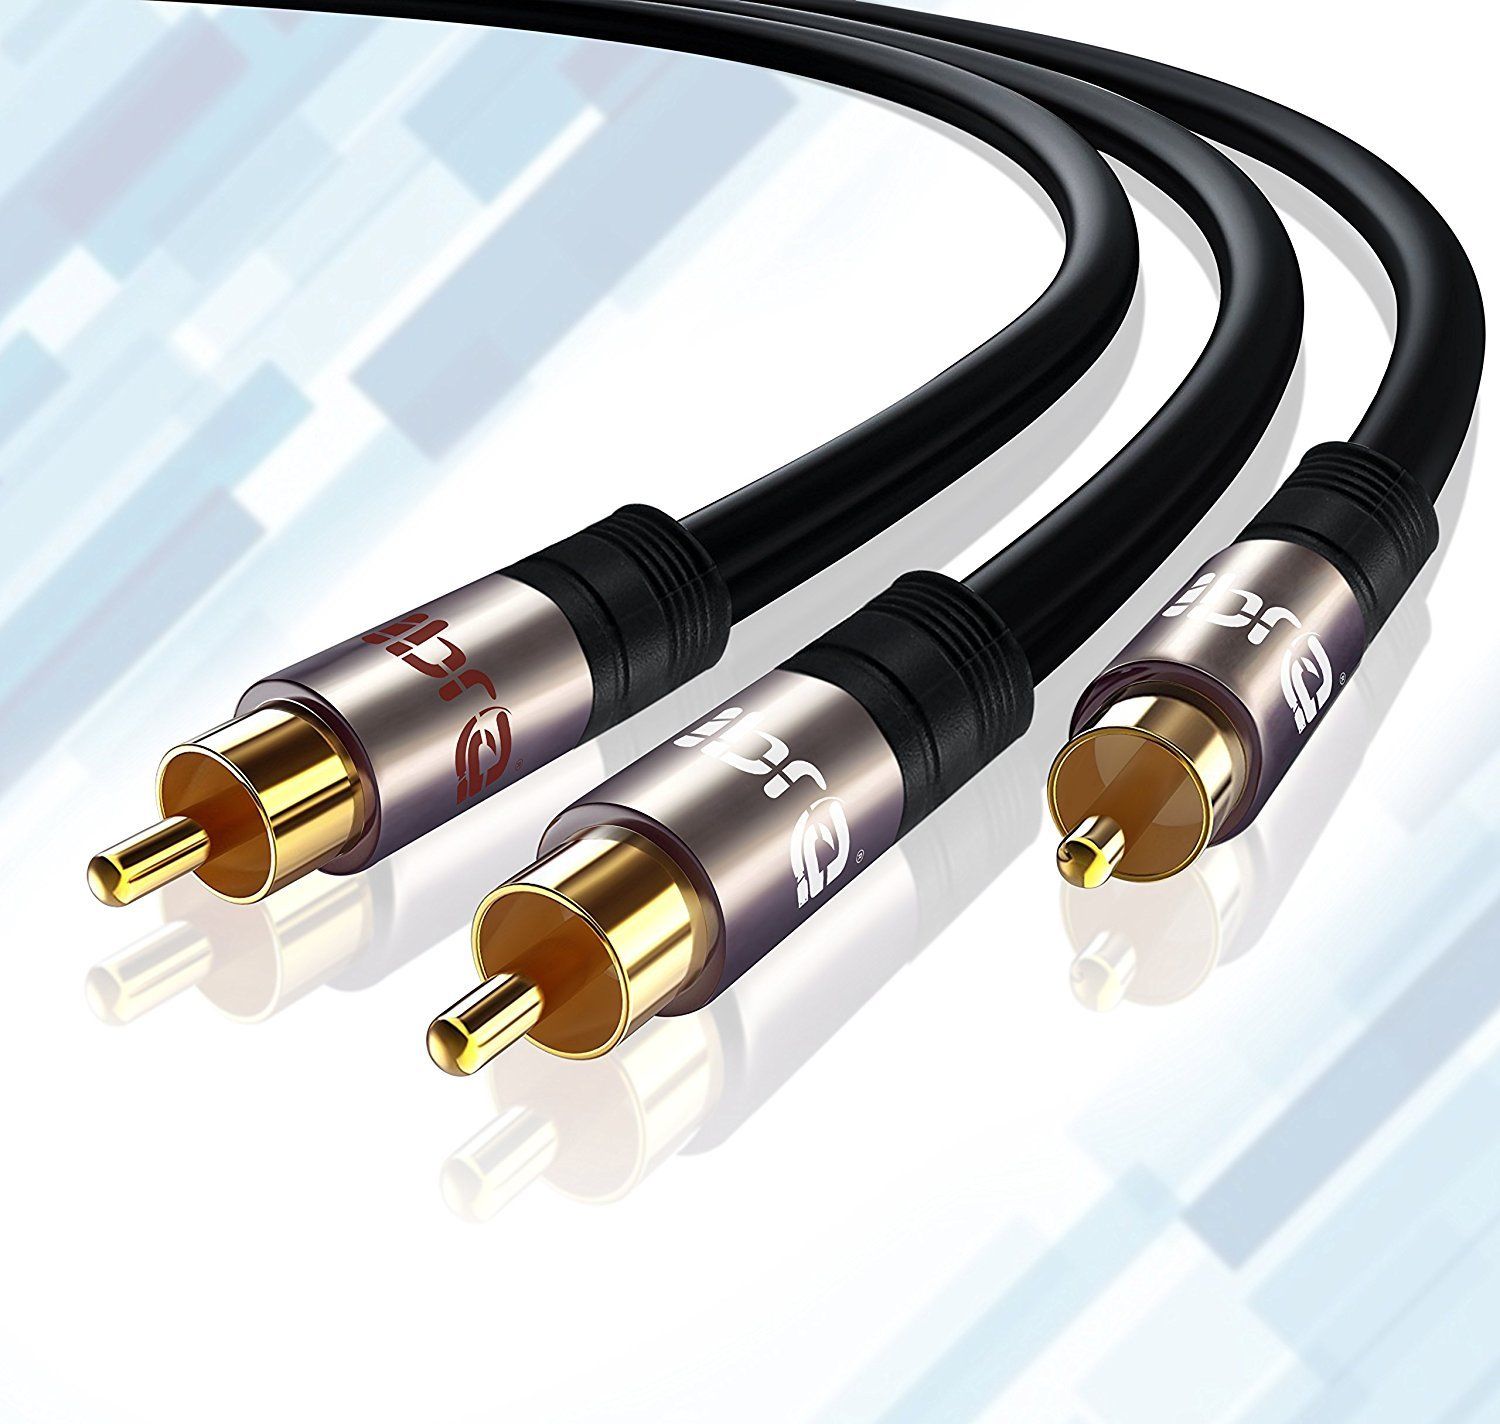 IBRA 10M Y Cable / Subwoofer Cable / Audio Cable / RCA Cable (1 x RCA to 2 x RCA) - GUN Metal Range